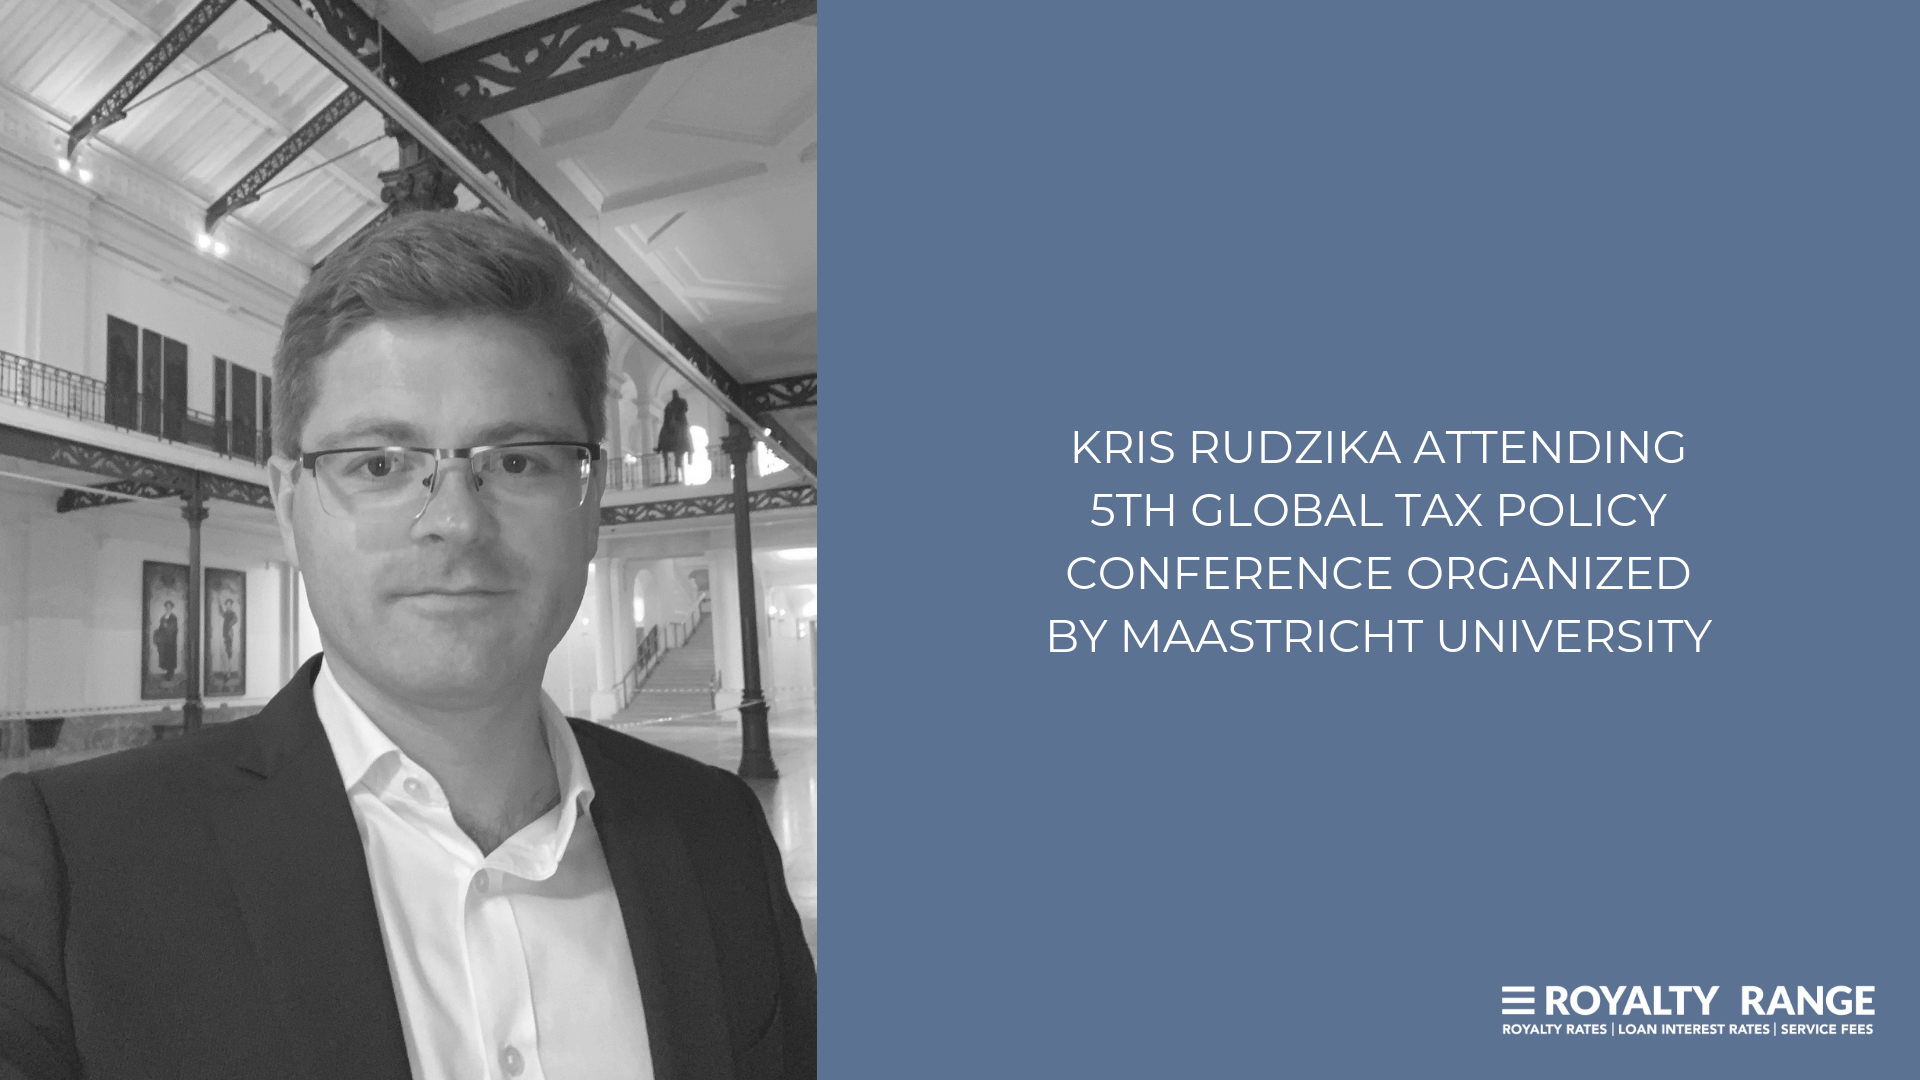 KRIS RUDZIKA ATTENDING 5TH GLOBAL TAX POLICY CONFERENCE ORGANIZED BY MAASTRICHT UNIVERSITY (1)